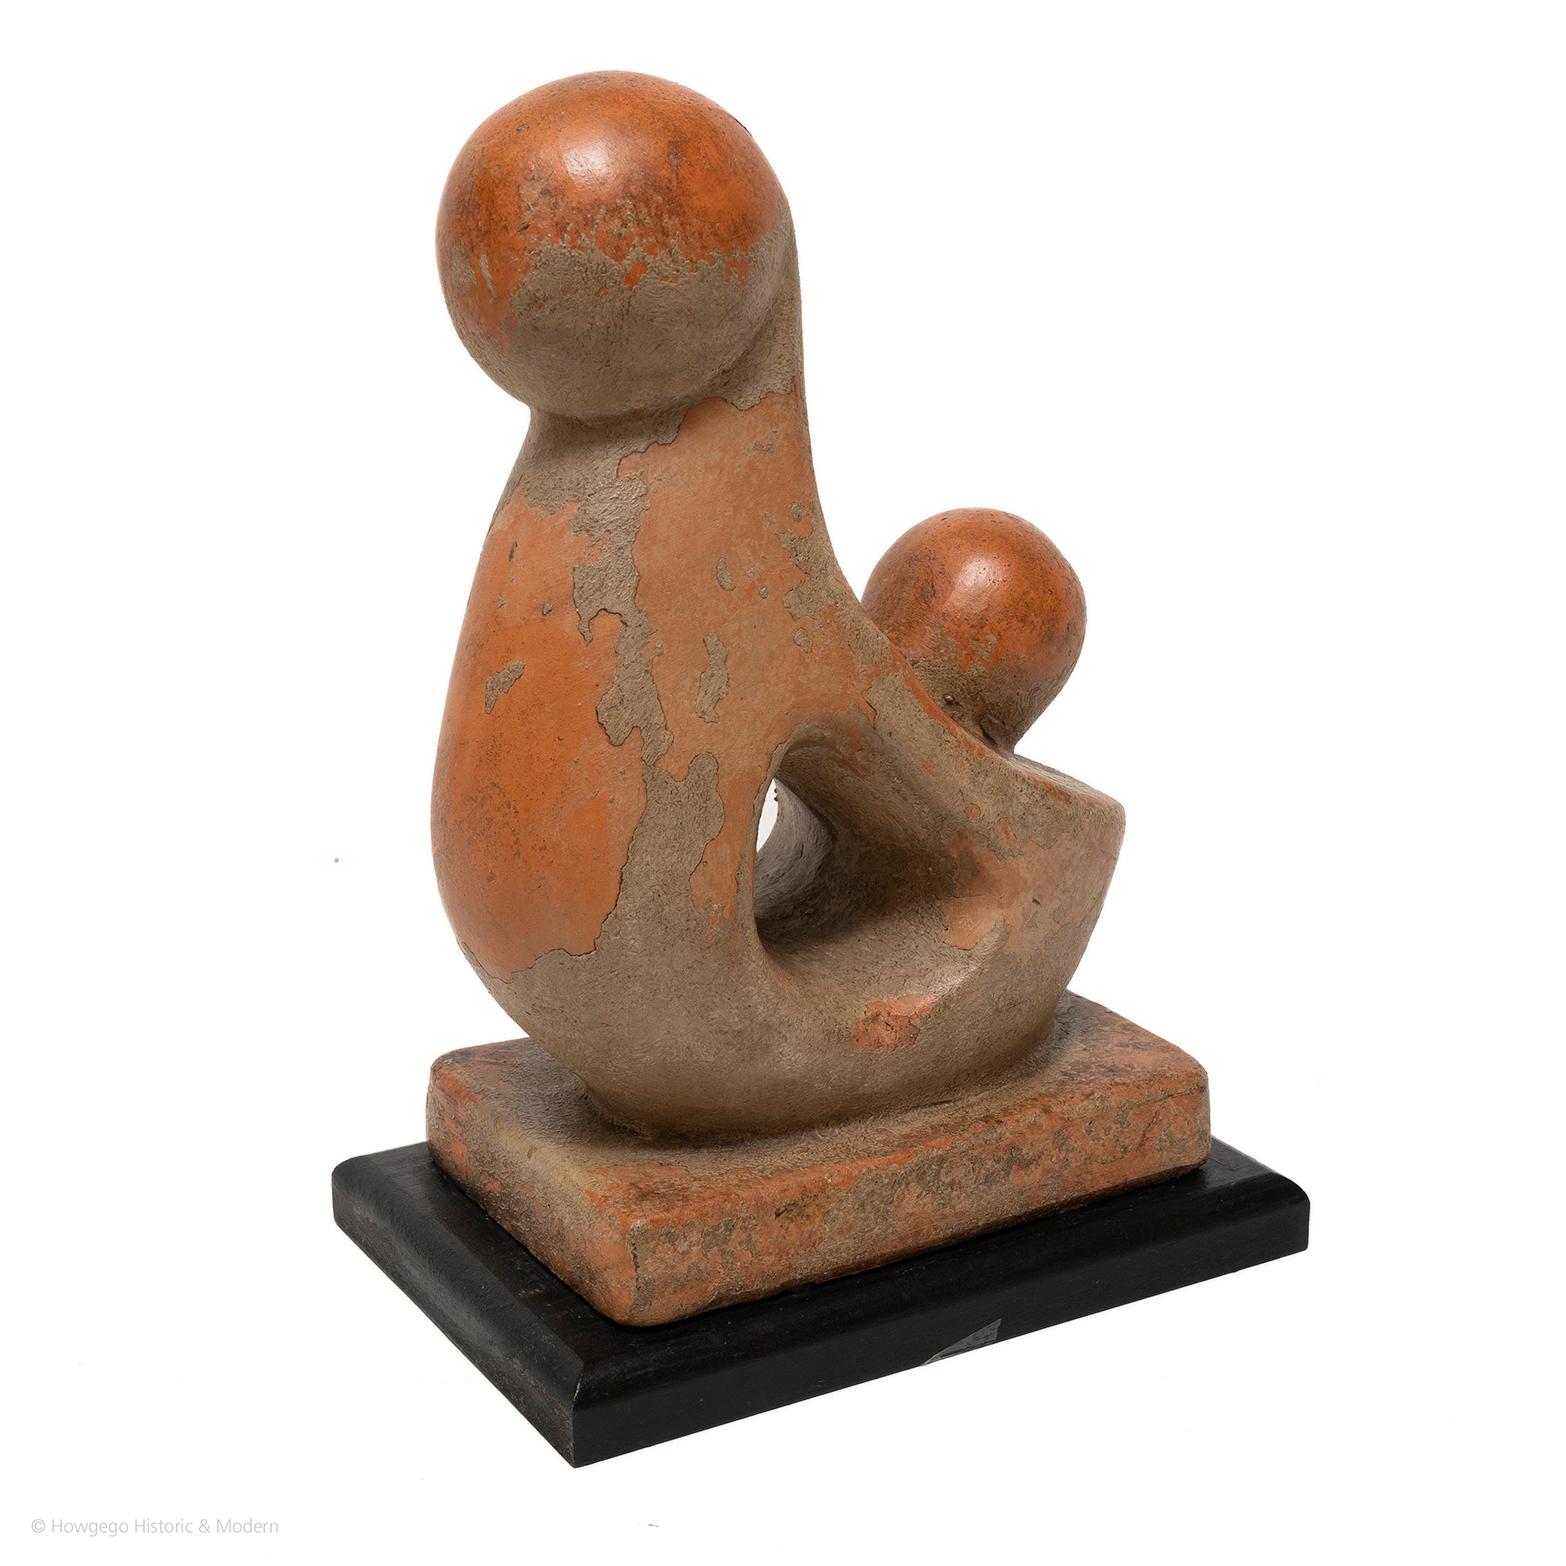 English Sculpture Terracotta Stone Mother & Child Biomorphic 39cm 15 1/4“ high For Sale